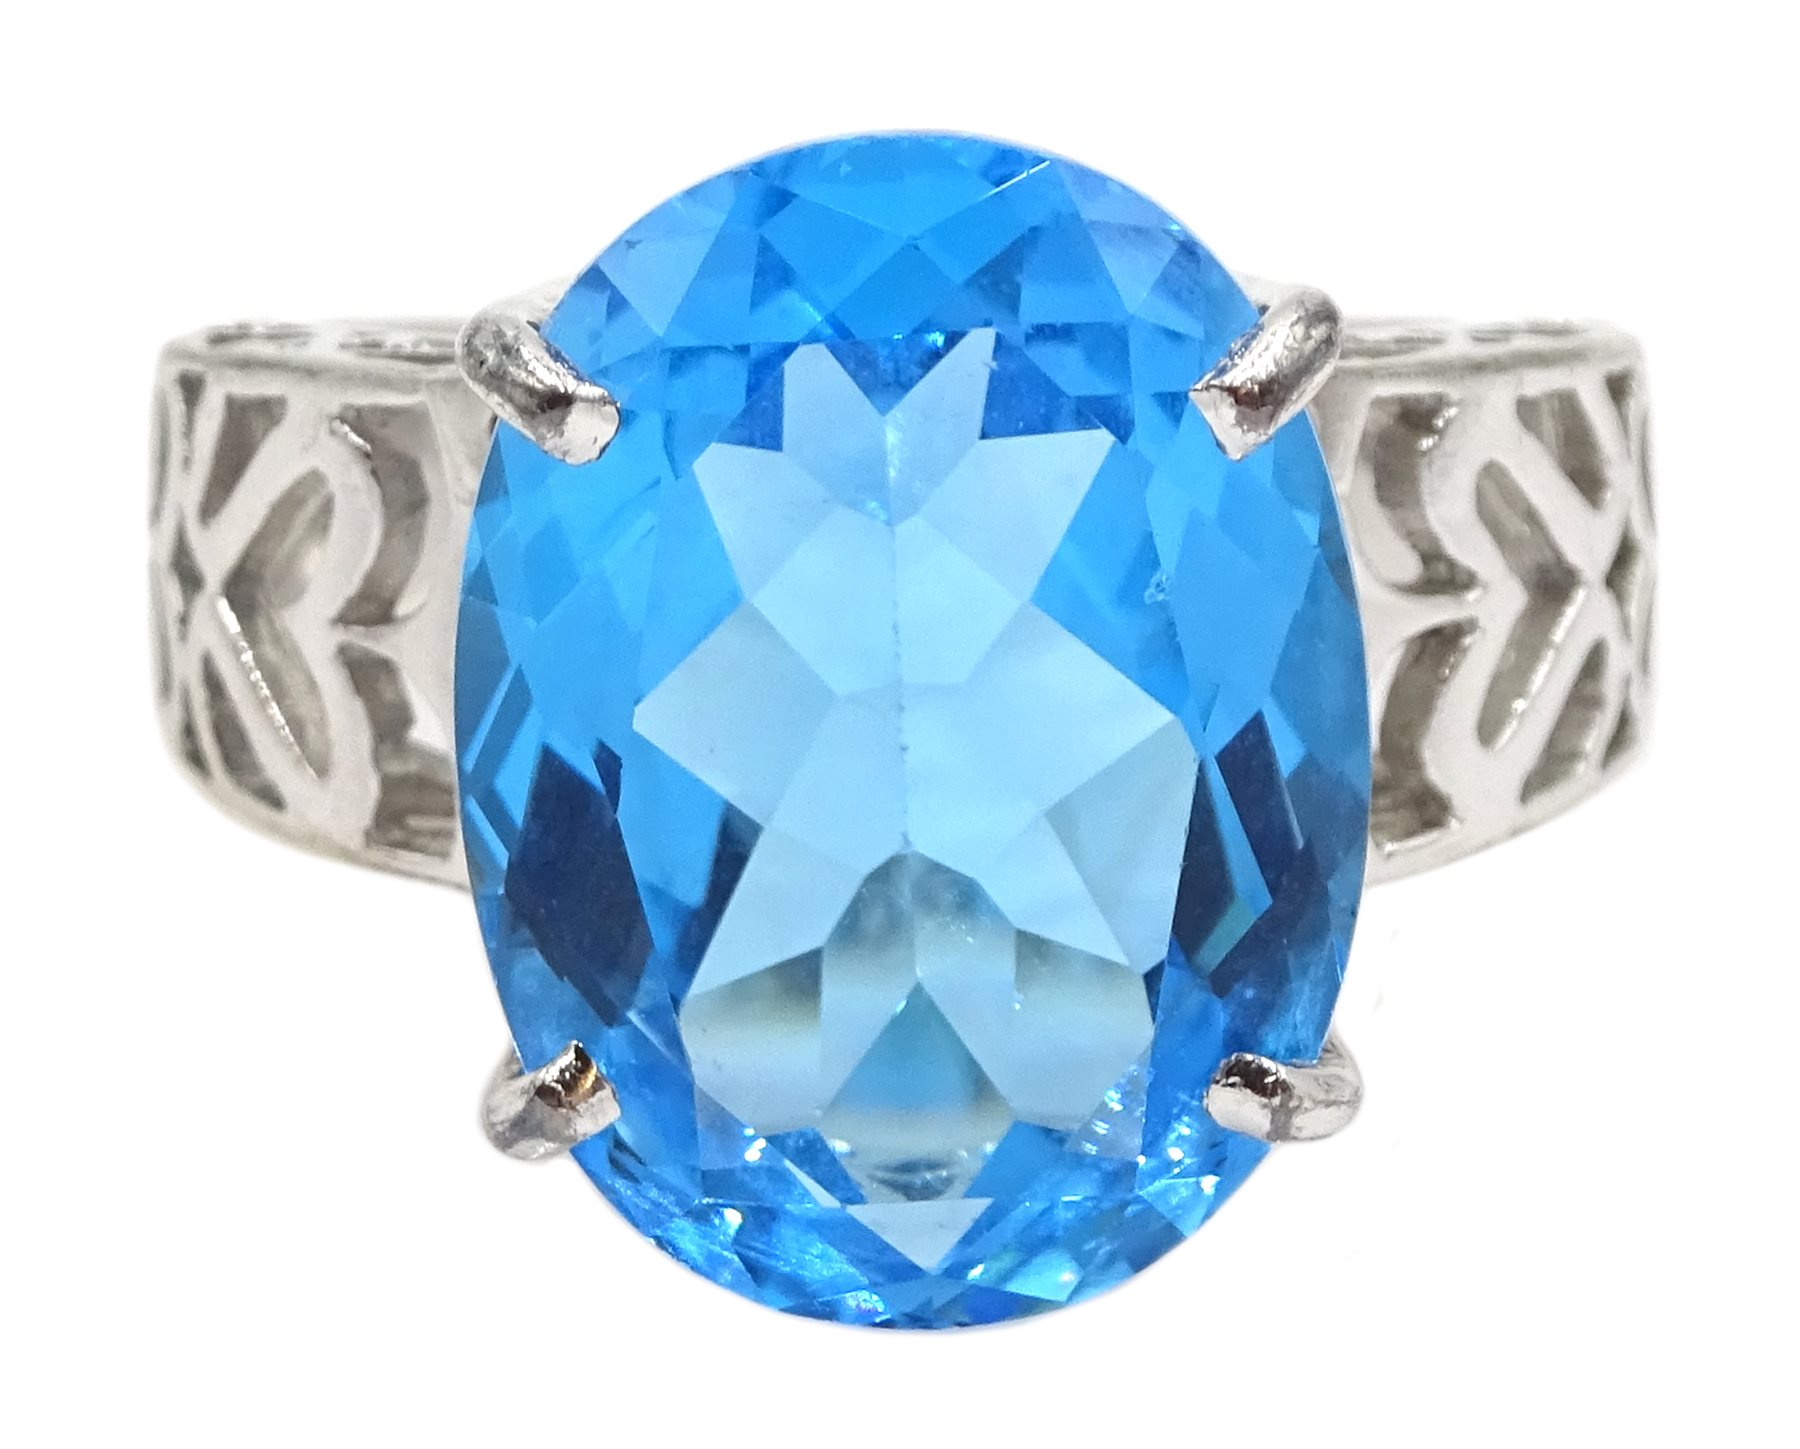 9ct white gold oval Swiss blue topaz ring, with openwork shank, stamped 375 [image code: 4mc]